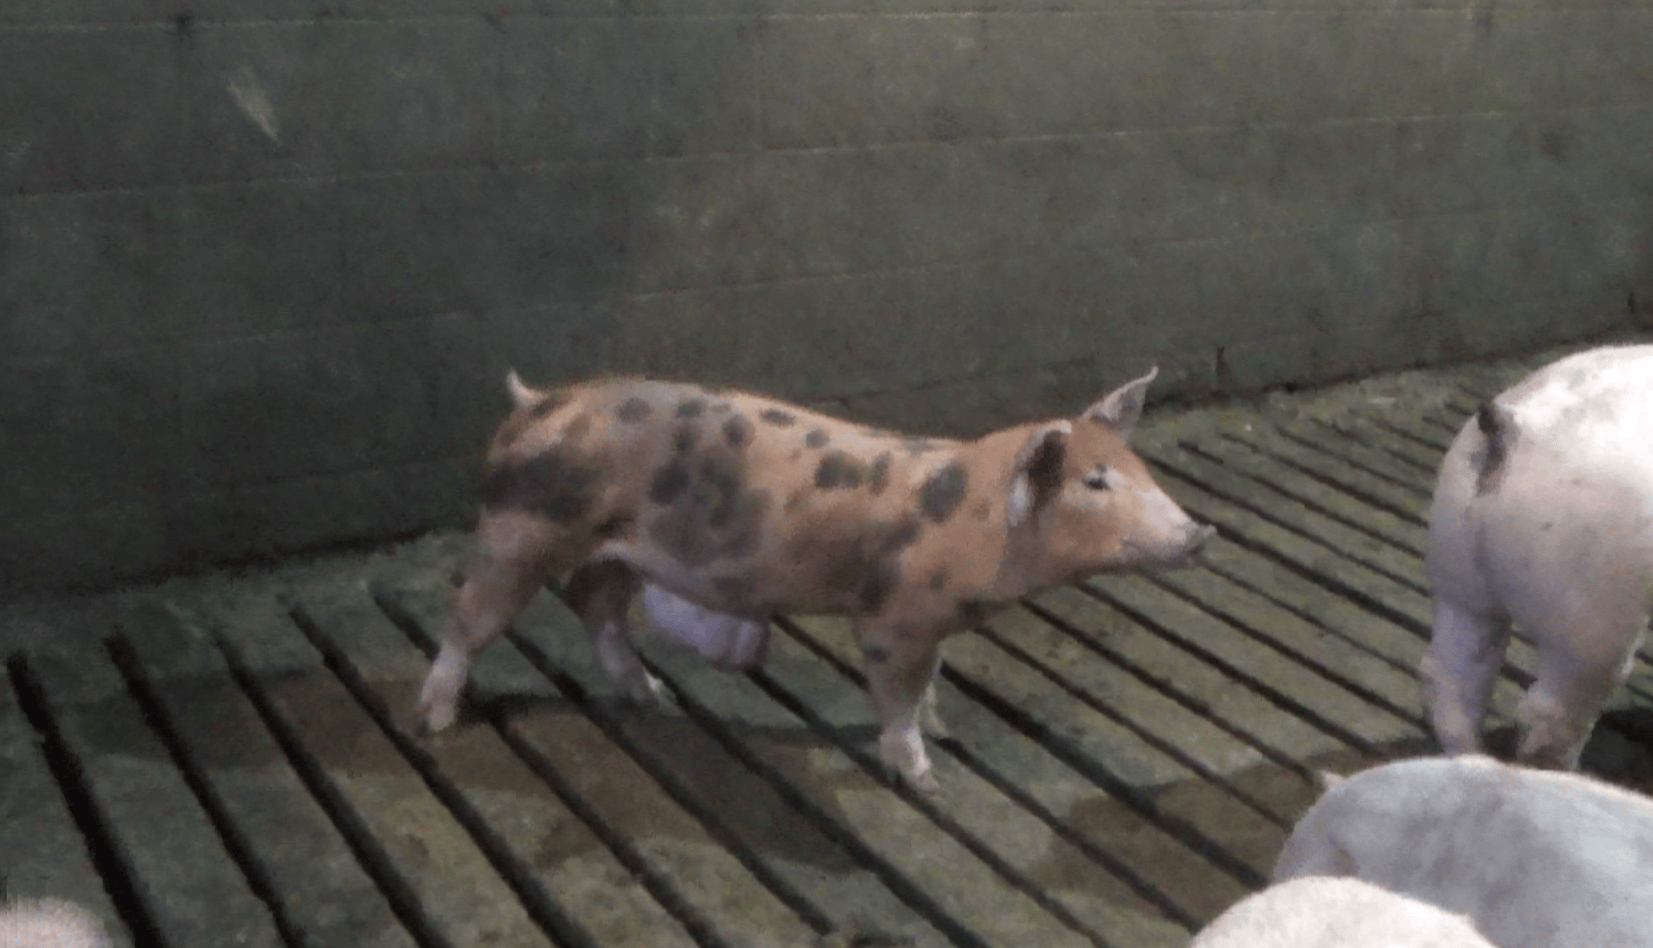 Piglet with hernia at Excelsior Hog Farm.